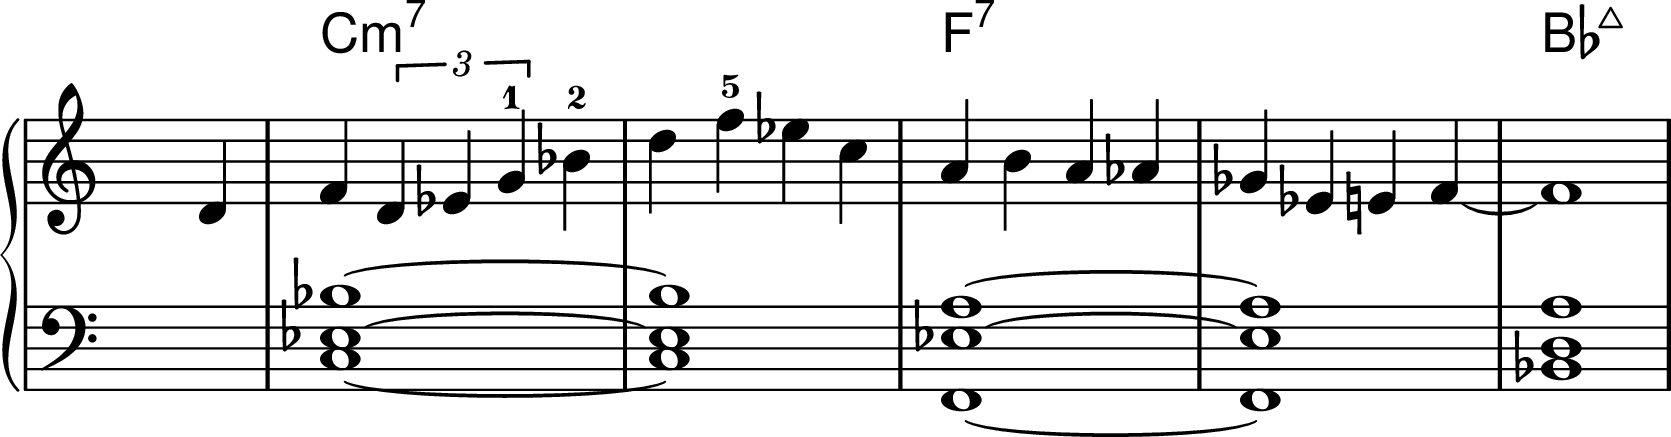 
\new PianoStaff <<

\chords {
  s1
  c1:min7 s1
  f1:7 s1
  bes1:maj7
}

  \new Staff \relative c' {
\key c \major 
\time 4/4
\omit Staff.TimeSignature
s2 s4

d f \tuplet 3/2 { d ees g-1 }  bes-2 d f-5 ees c 
a b a aes ges ees e
f~ 1

 }

  \new Staff \relative c {
\clef bass 
\key c \major 
\time 4/4
\omit Staff.TimeSignature
s1
< c ees bes' >1~ 1
< f, ees' a>1~ 1
< bes d a'>1
}
>>
